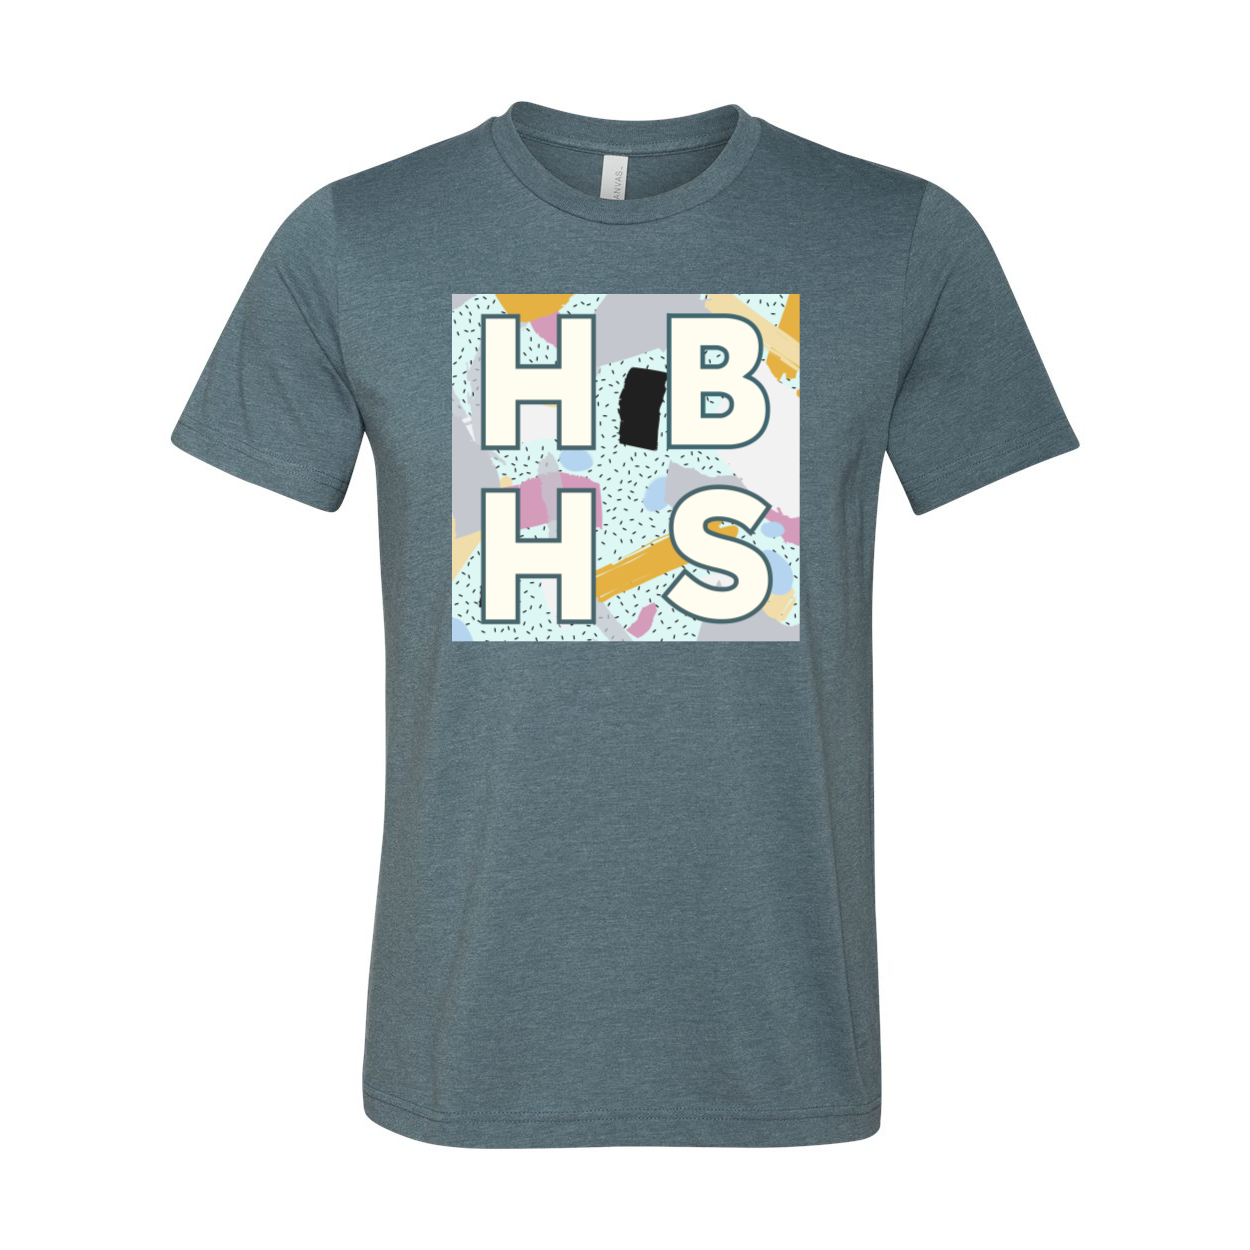 HBHS Patterned Soft T-Shirt